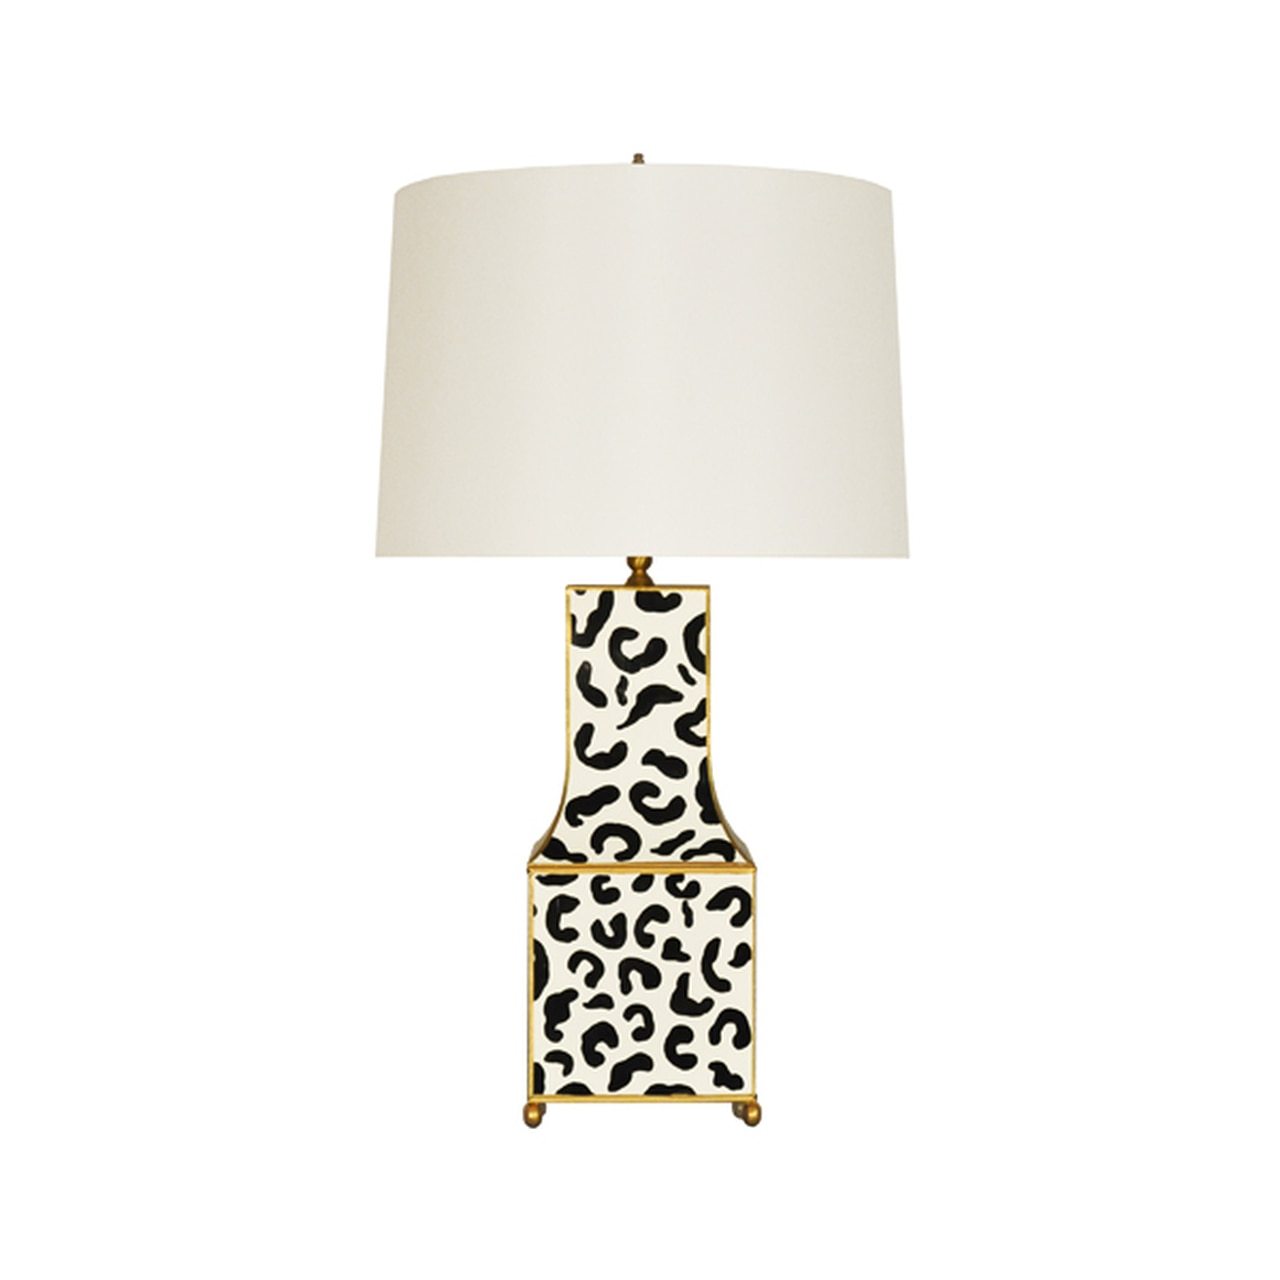 Worlds Away Renata Hand painted Pagoda Table Lamp in Black Leopard - Trellis Home